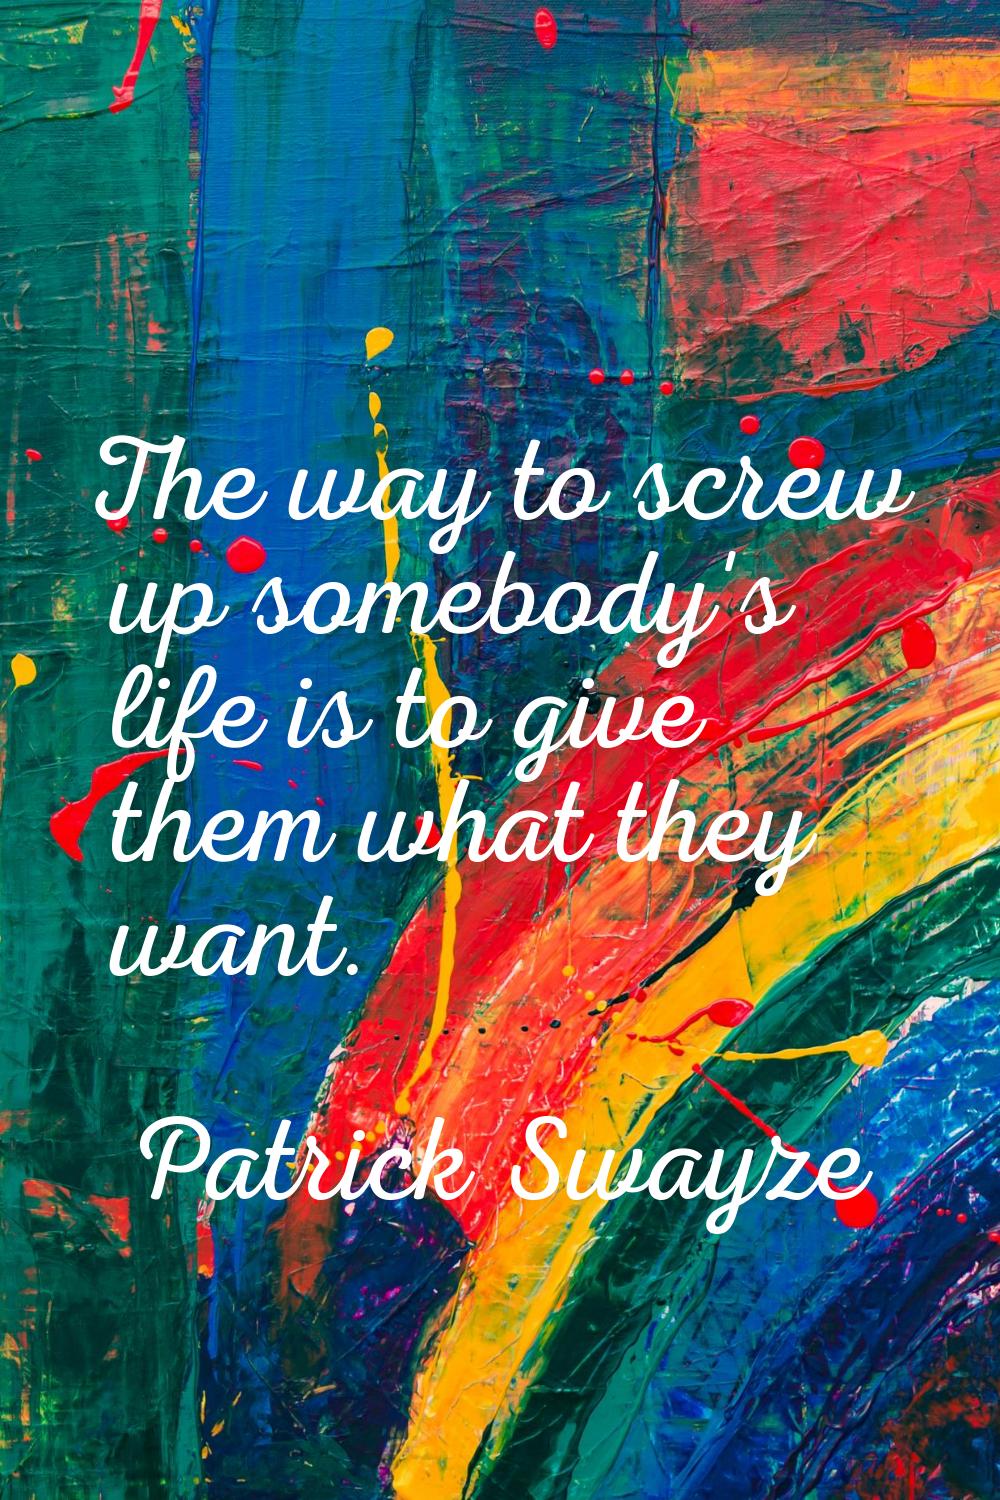 The way to screw up somebody's life is to give them what they want.